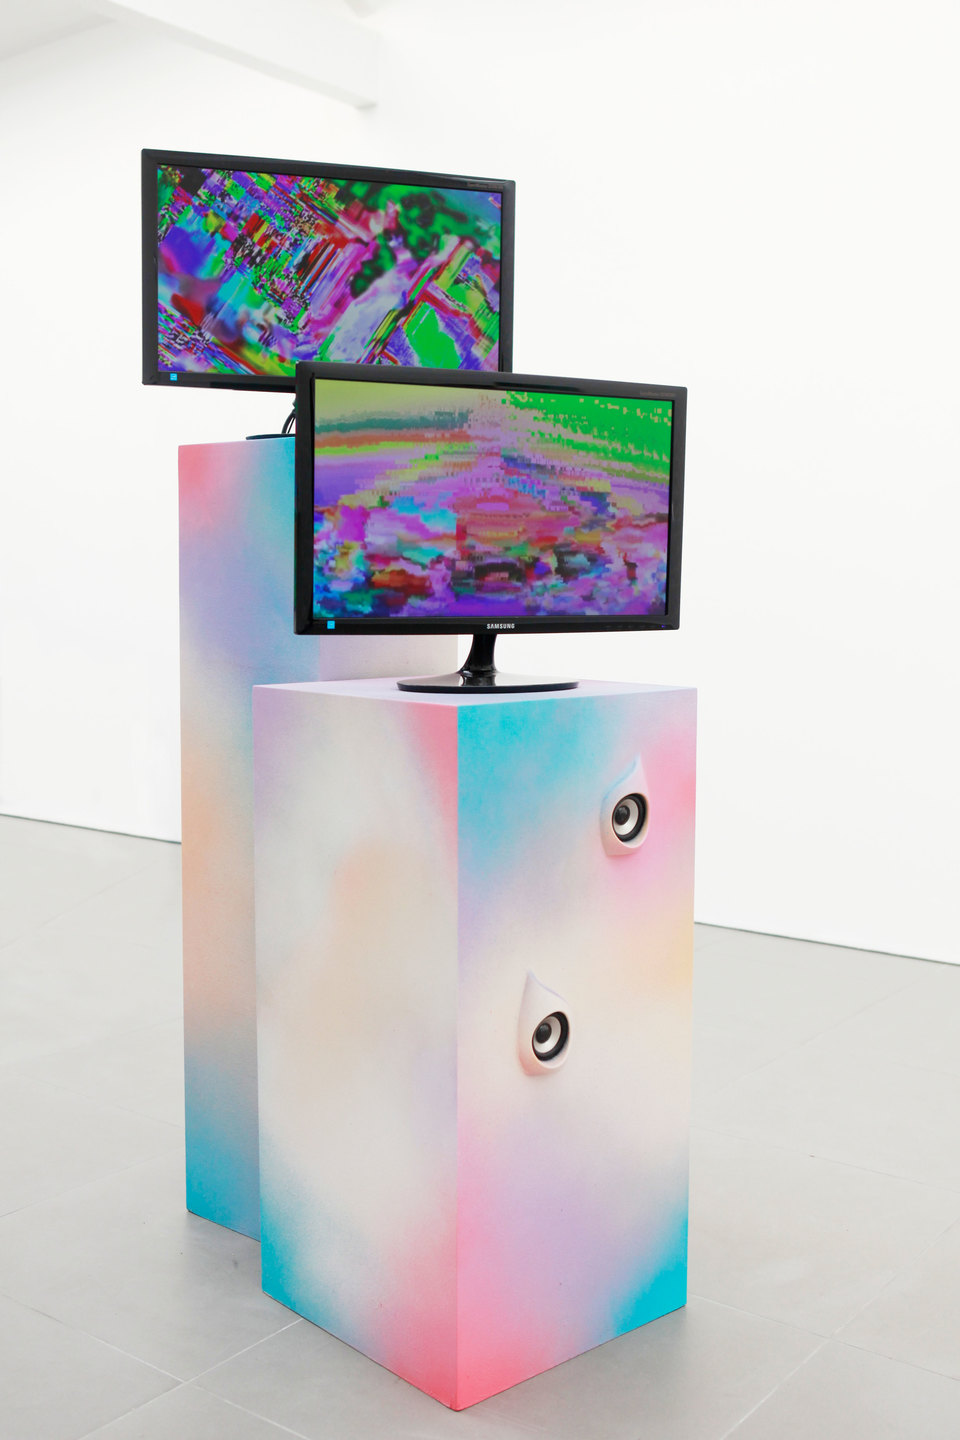 Adham Faramawy, Violet Likes Psychic Honey 2, 2012, Looped video + sculpture, 164 x 31 x 31 cm and 130 x 43 x 43 cm, Cell Project Space